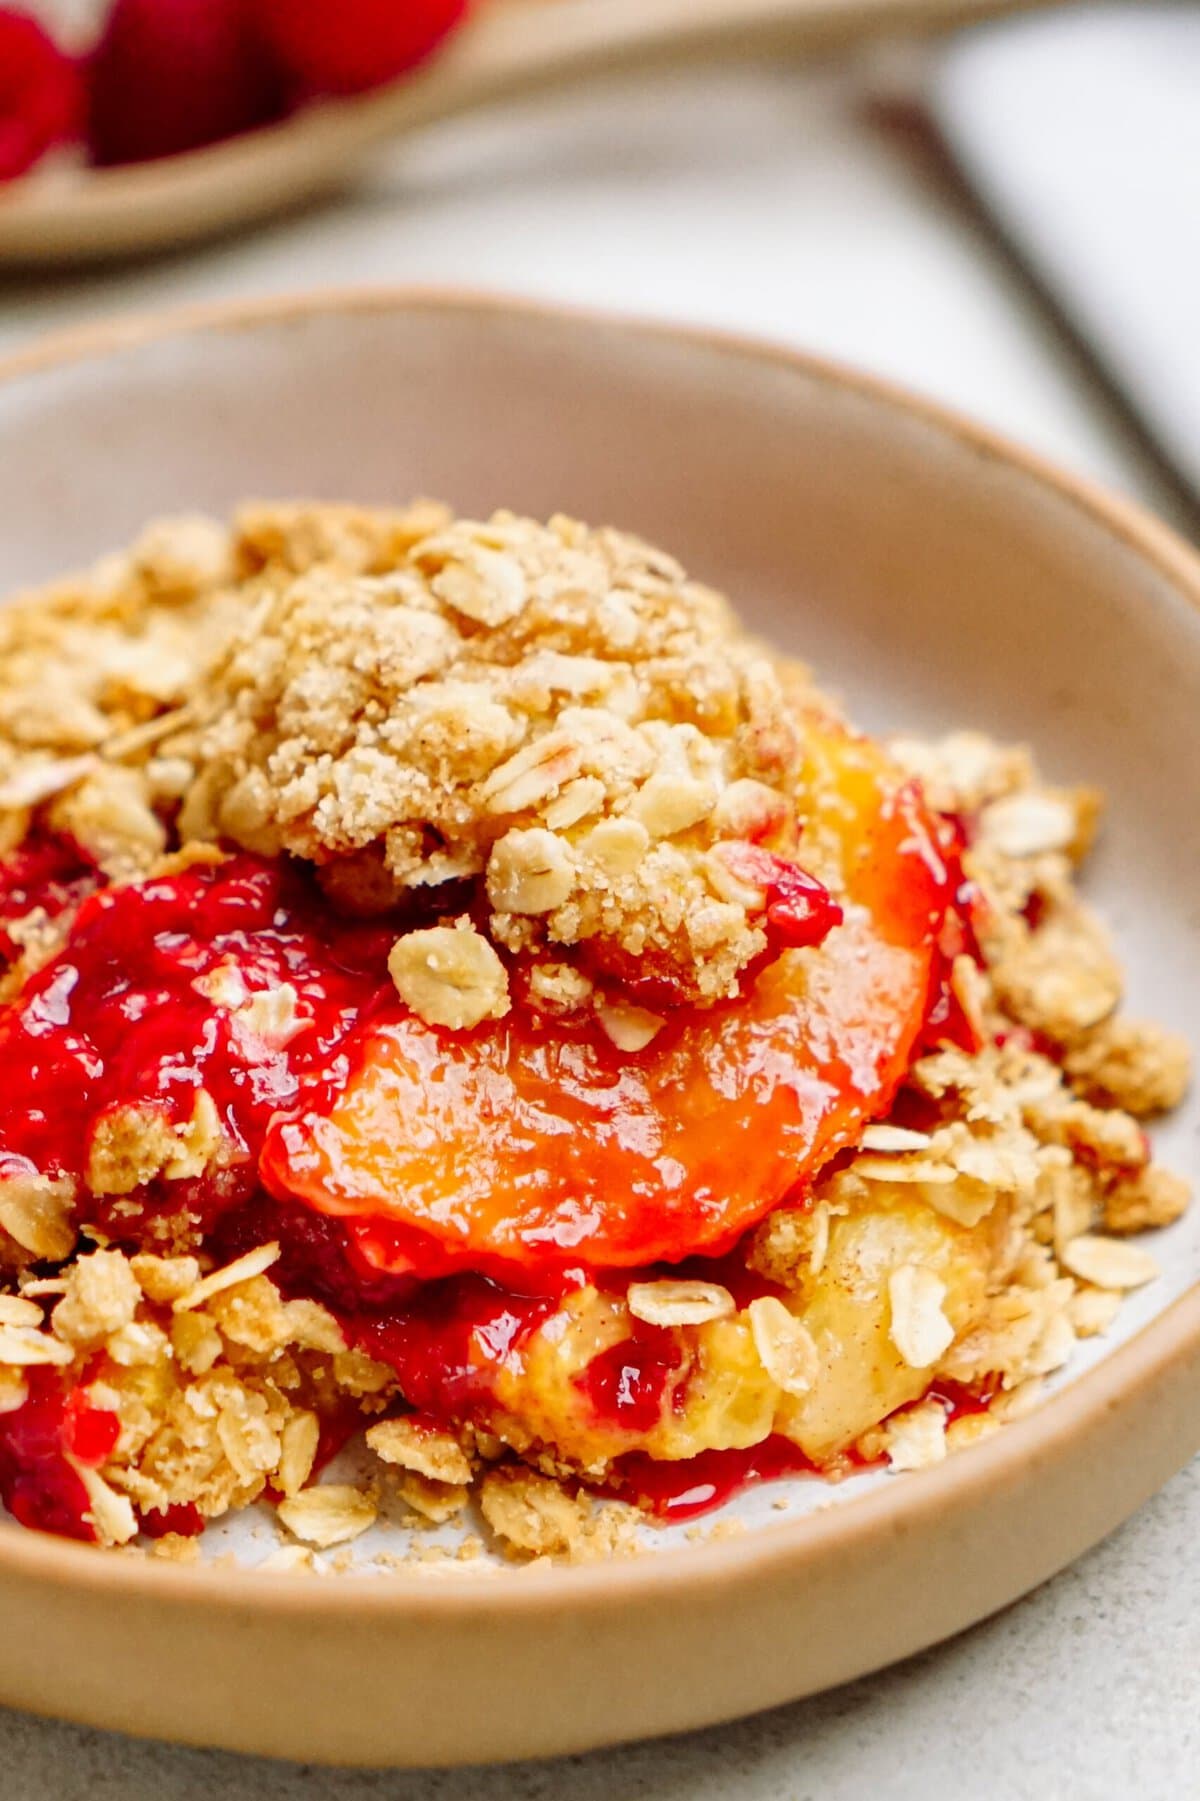 A close-up of a raspberry cobbler with a topping of oats and a mix of red and yellow fruit slices in a bowl.